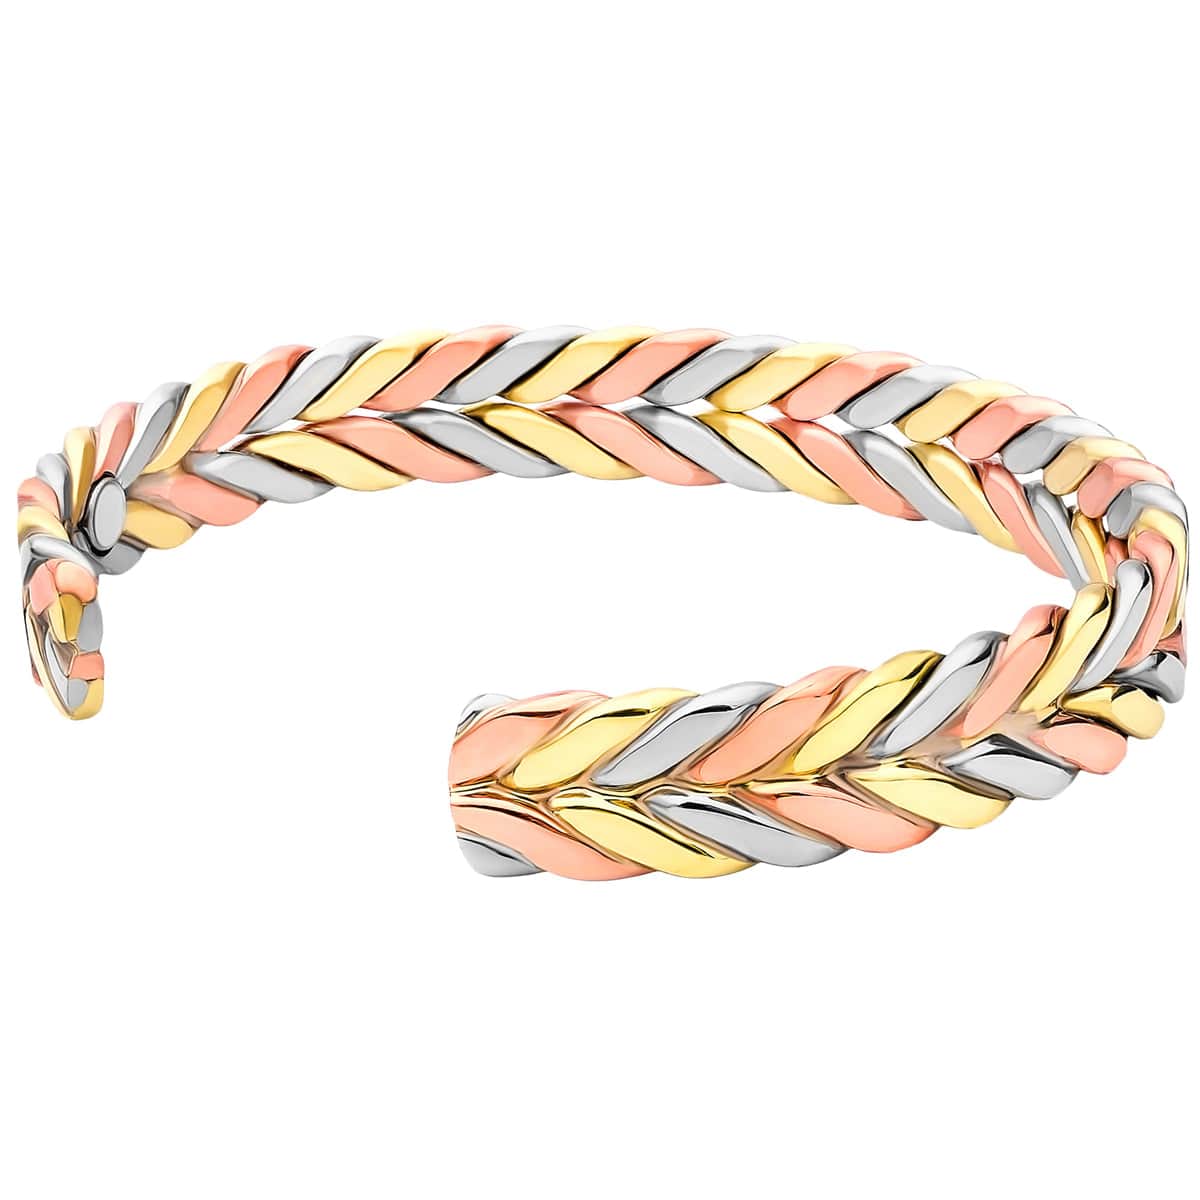 Woven Tri-Tone Magnetic Therapy Bracelet Cuff